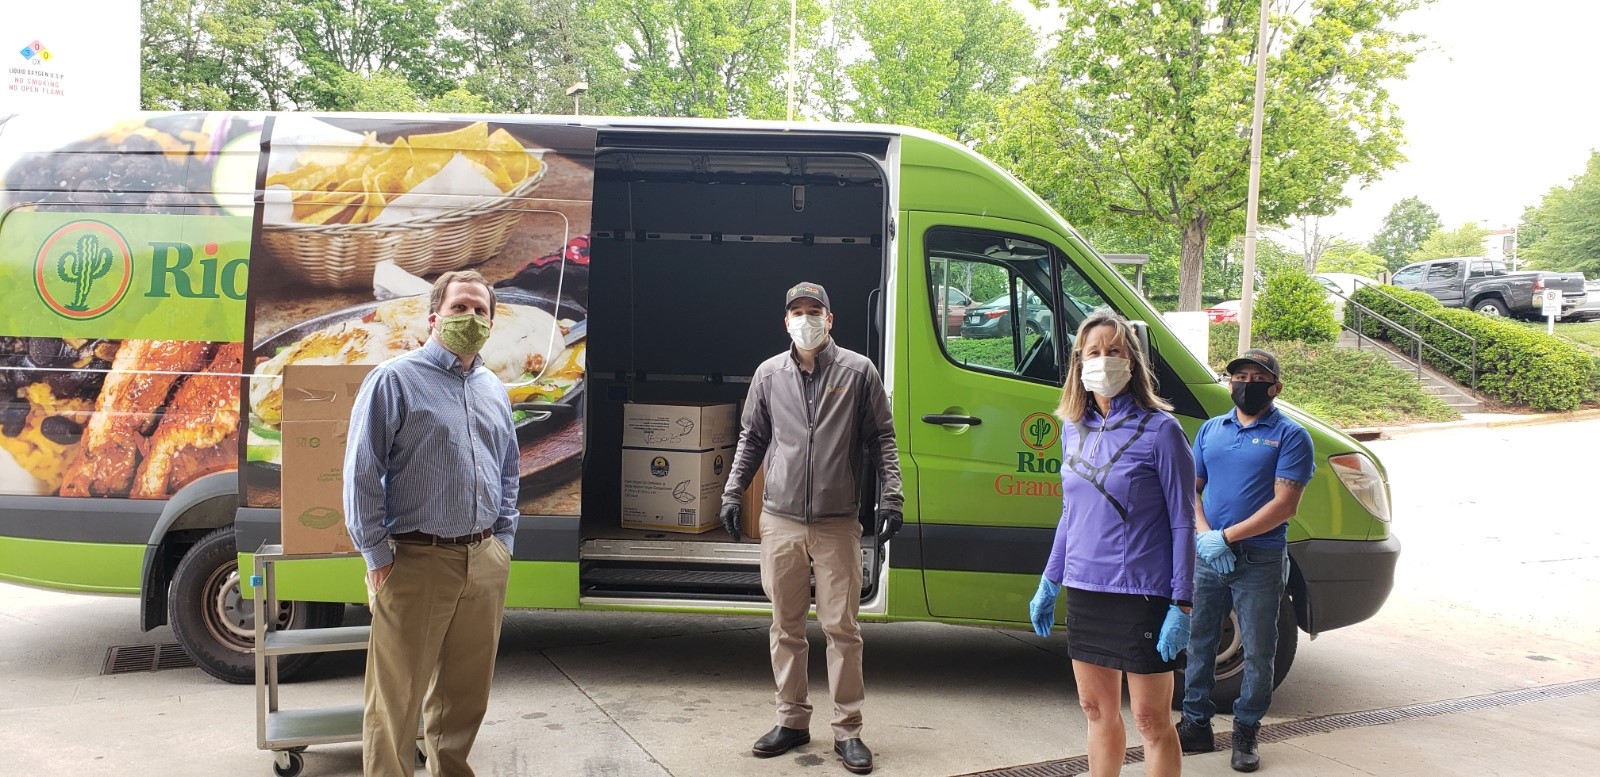 NP and Rio Grande Deliver Food to Cone Hospital (Green Valley) Health Care workers